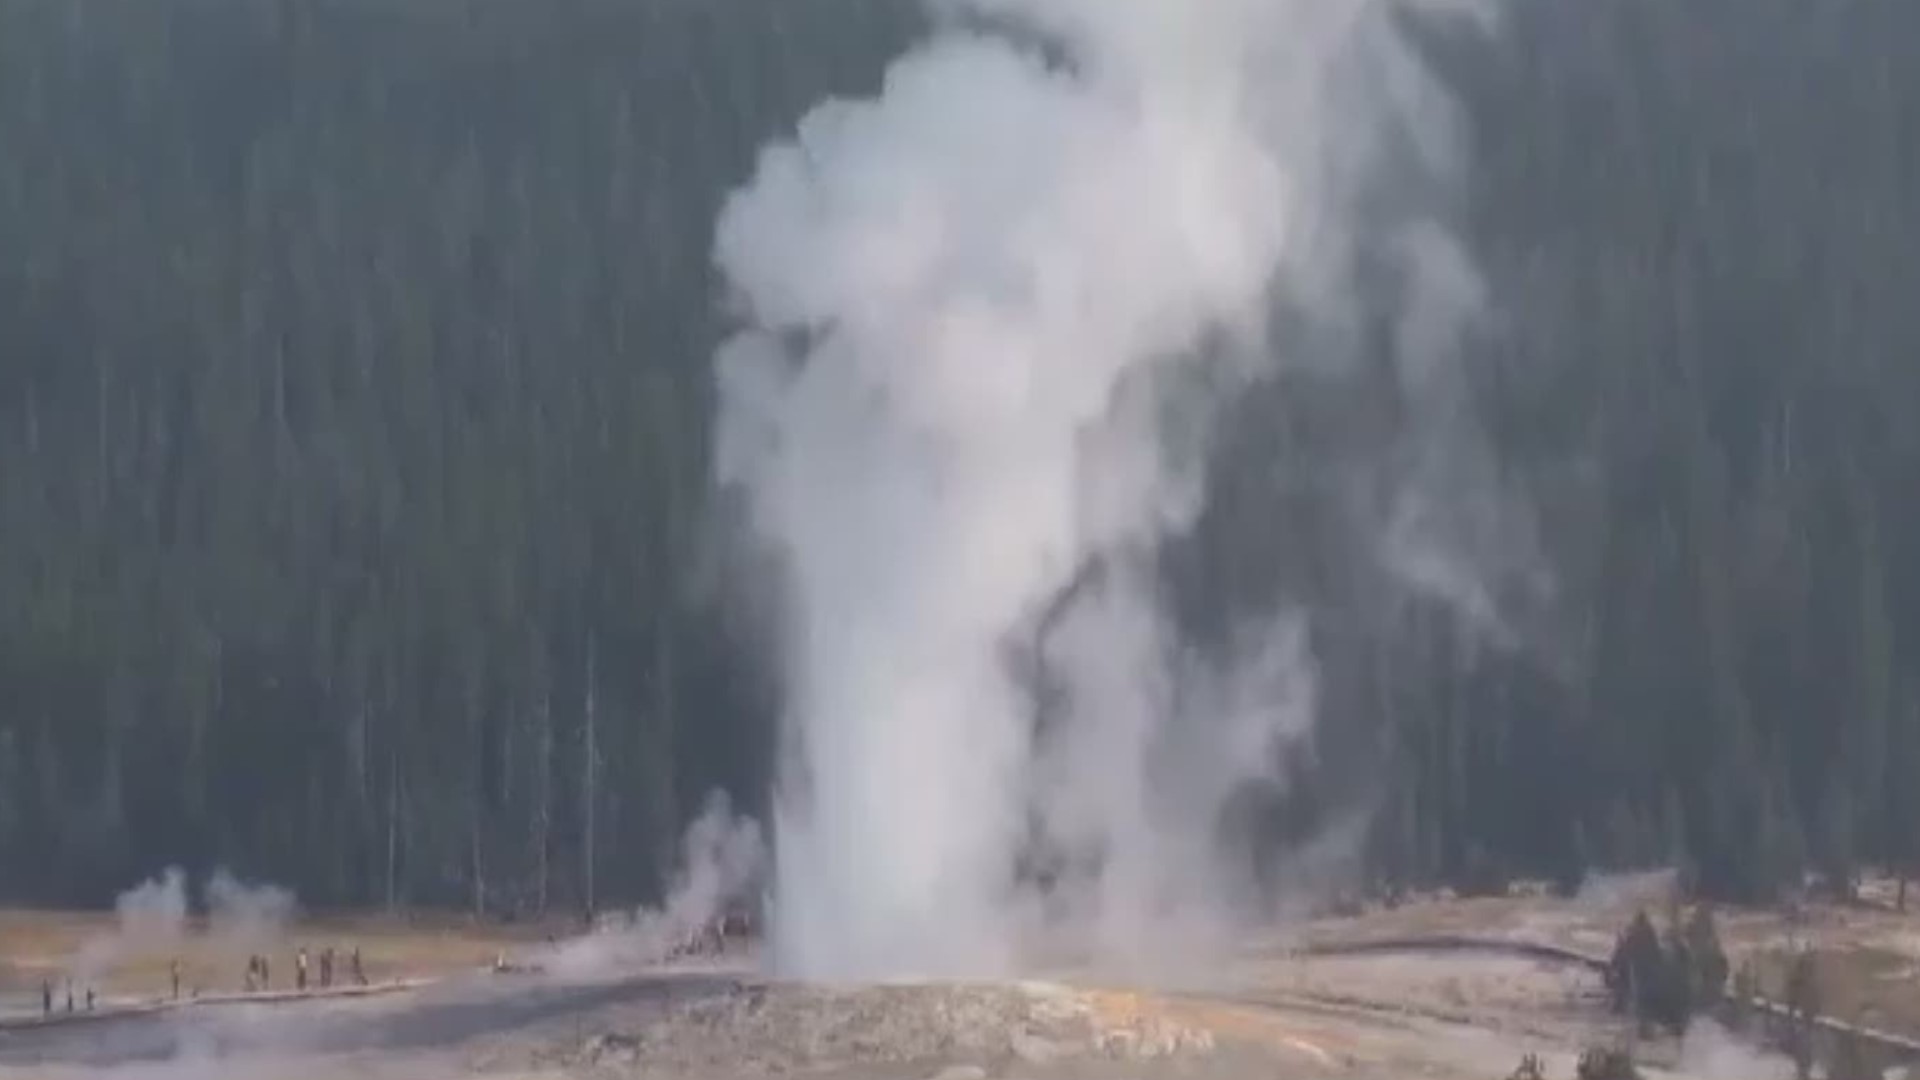 Prior to last week's incident, the geyser last erupted on January 29, 2014.